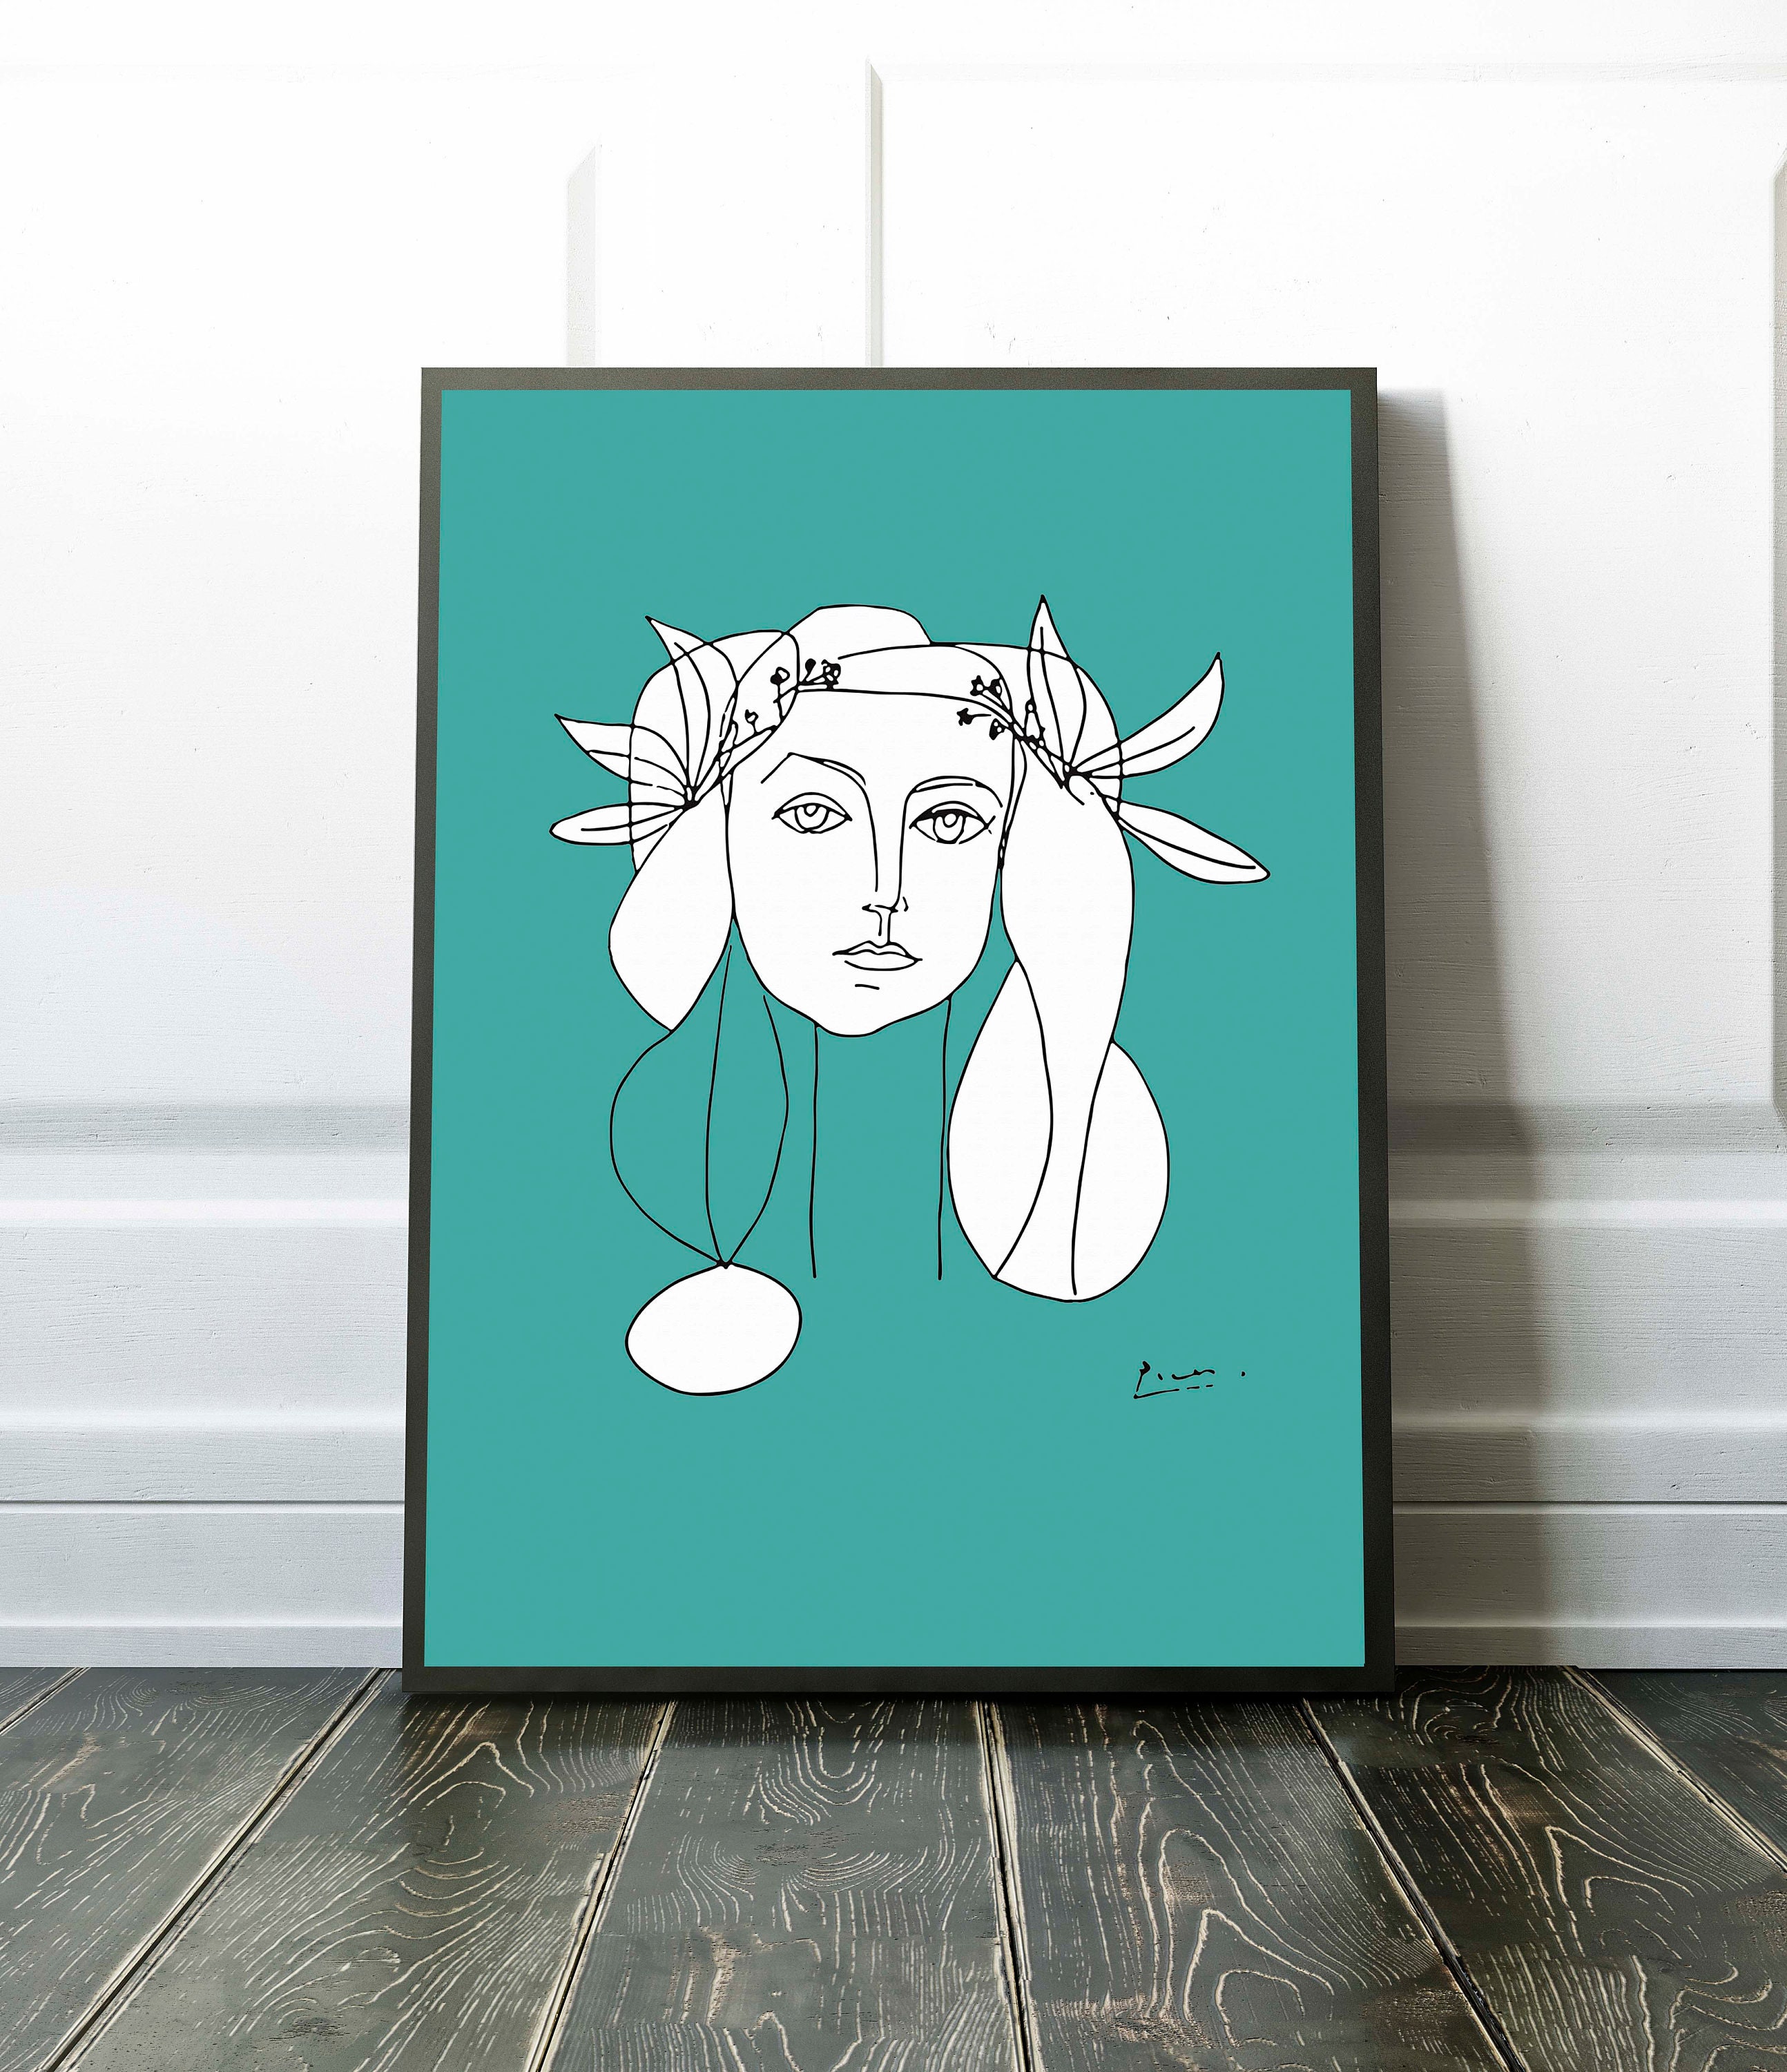 Picasso Art Print Picasso Modern Minimalist Picasso Poster Etsy